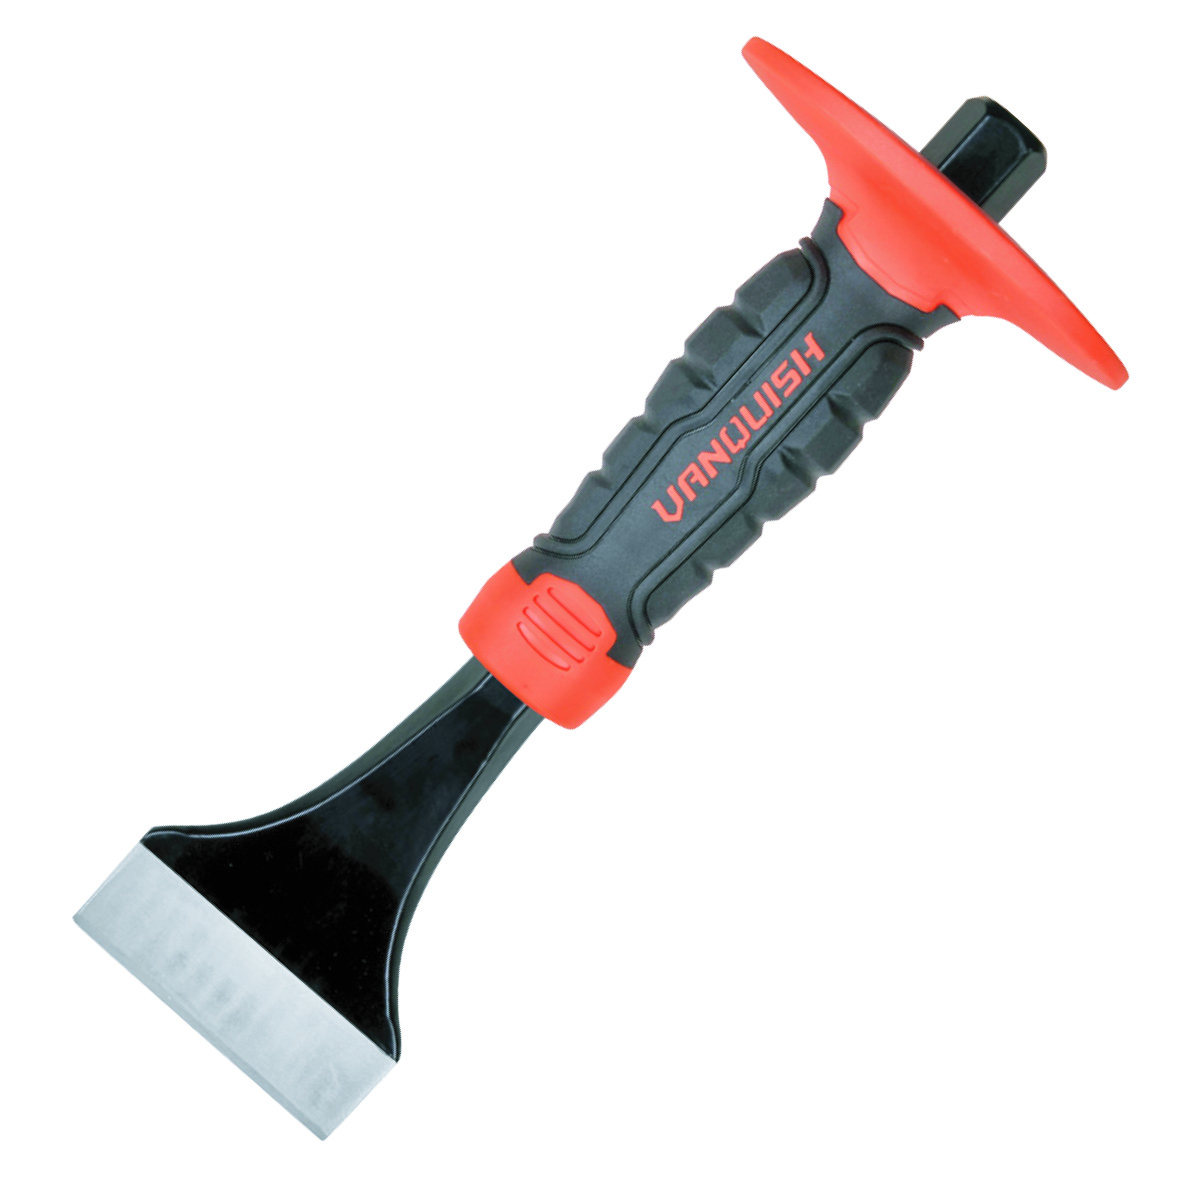 ELECTRICIAN CHISEL WITH GUARD-CRMO BLADE